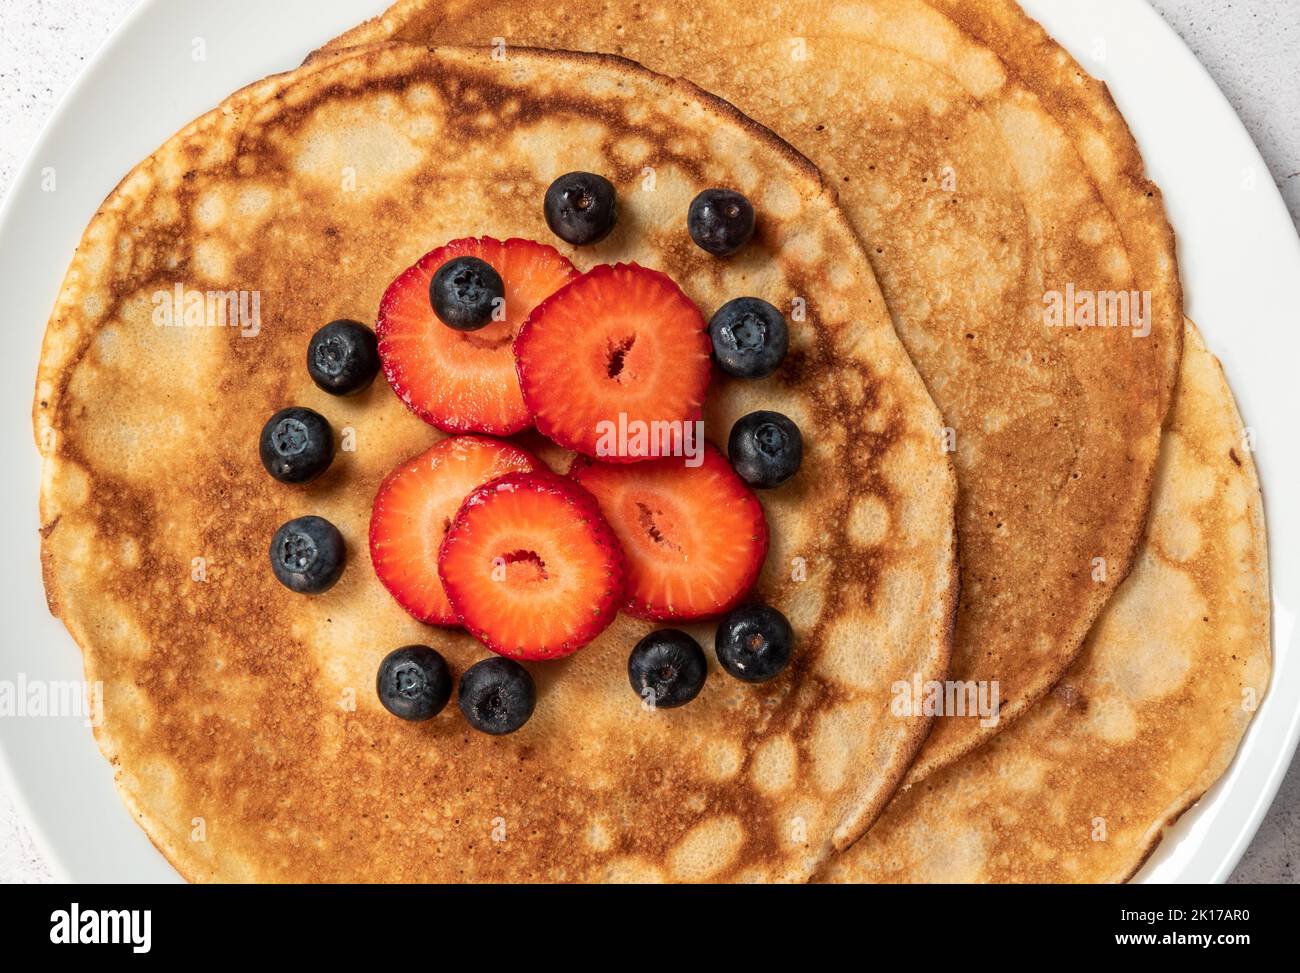 Pancakes with strawberries and blueberries Stock Photo